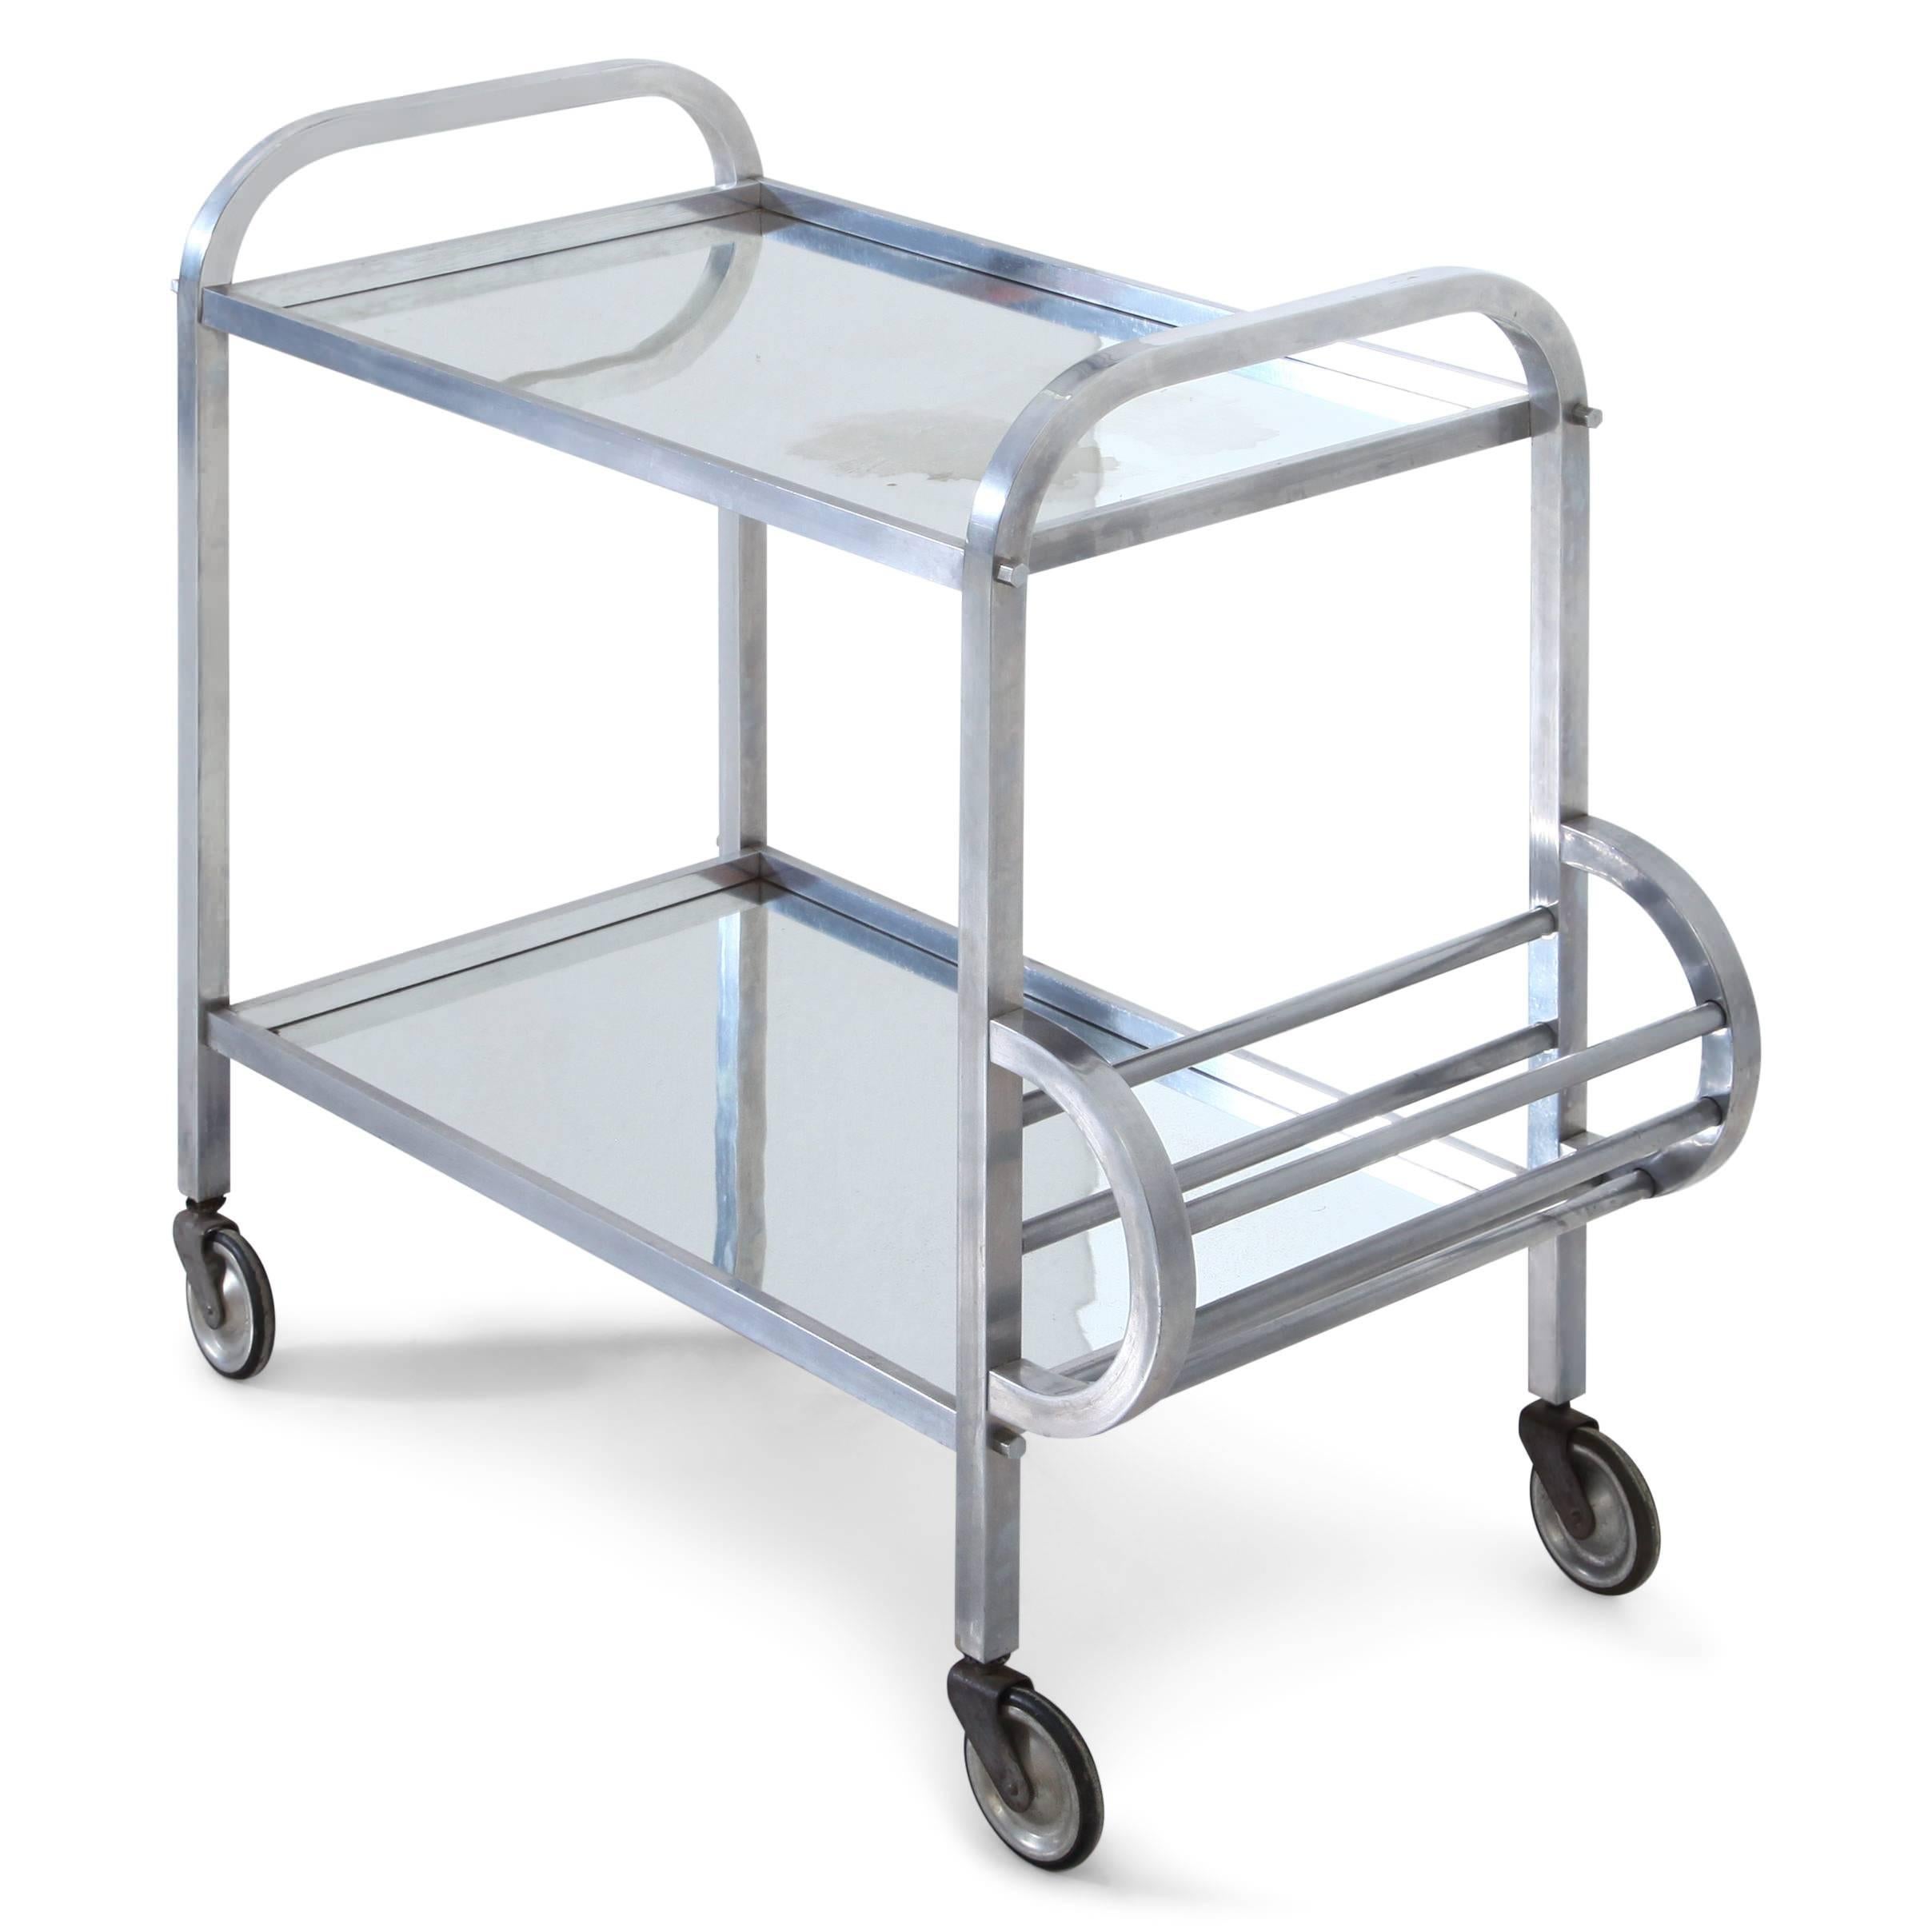 Serving trolley or Bart cart out of aluminium in the style of Jacques Adnet. The trolley stands on four wheels and has two tiers with a bottle holder on one side.